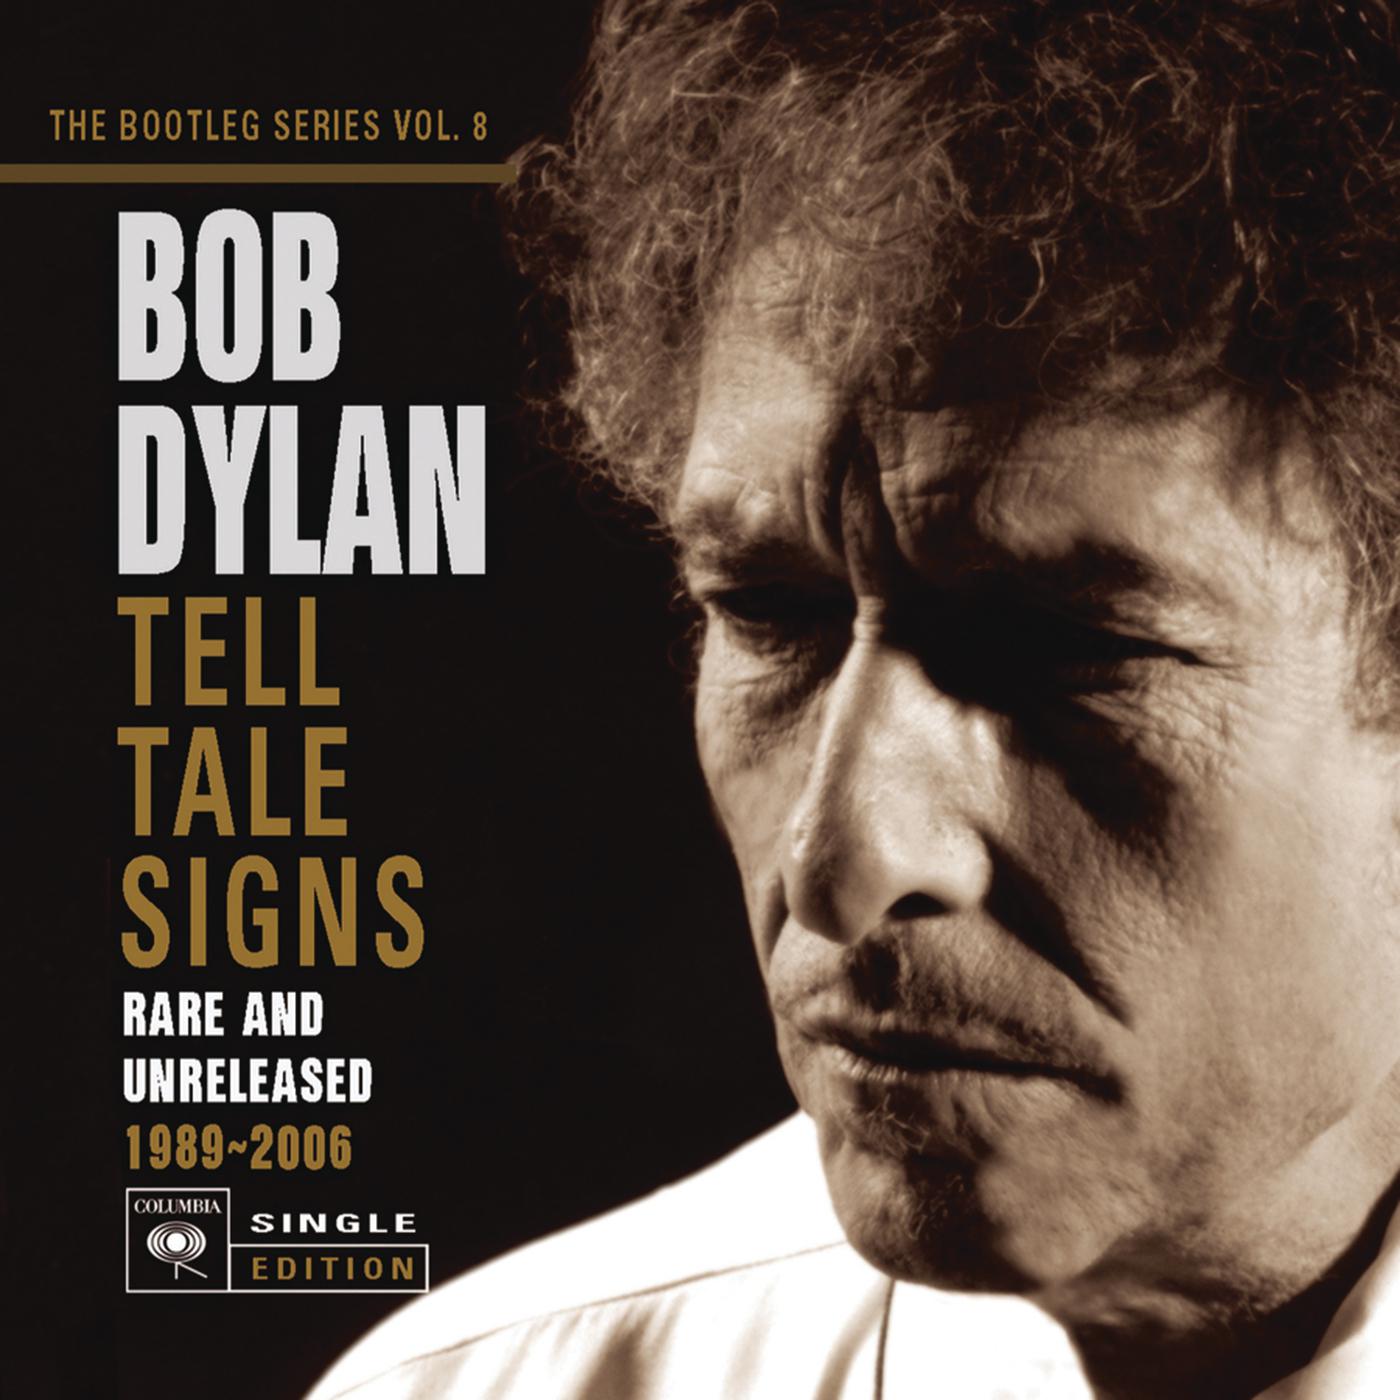 Bob Dylan - Mississippi (Outtake from 